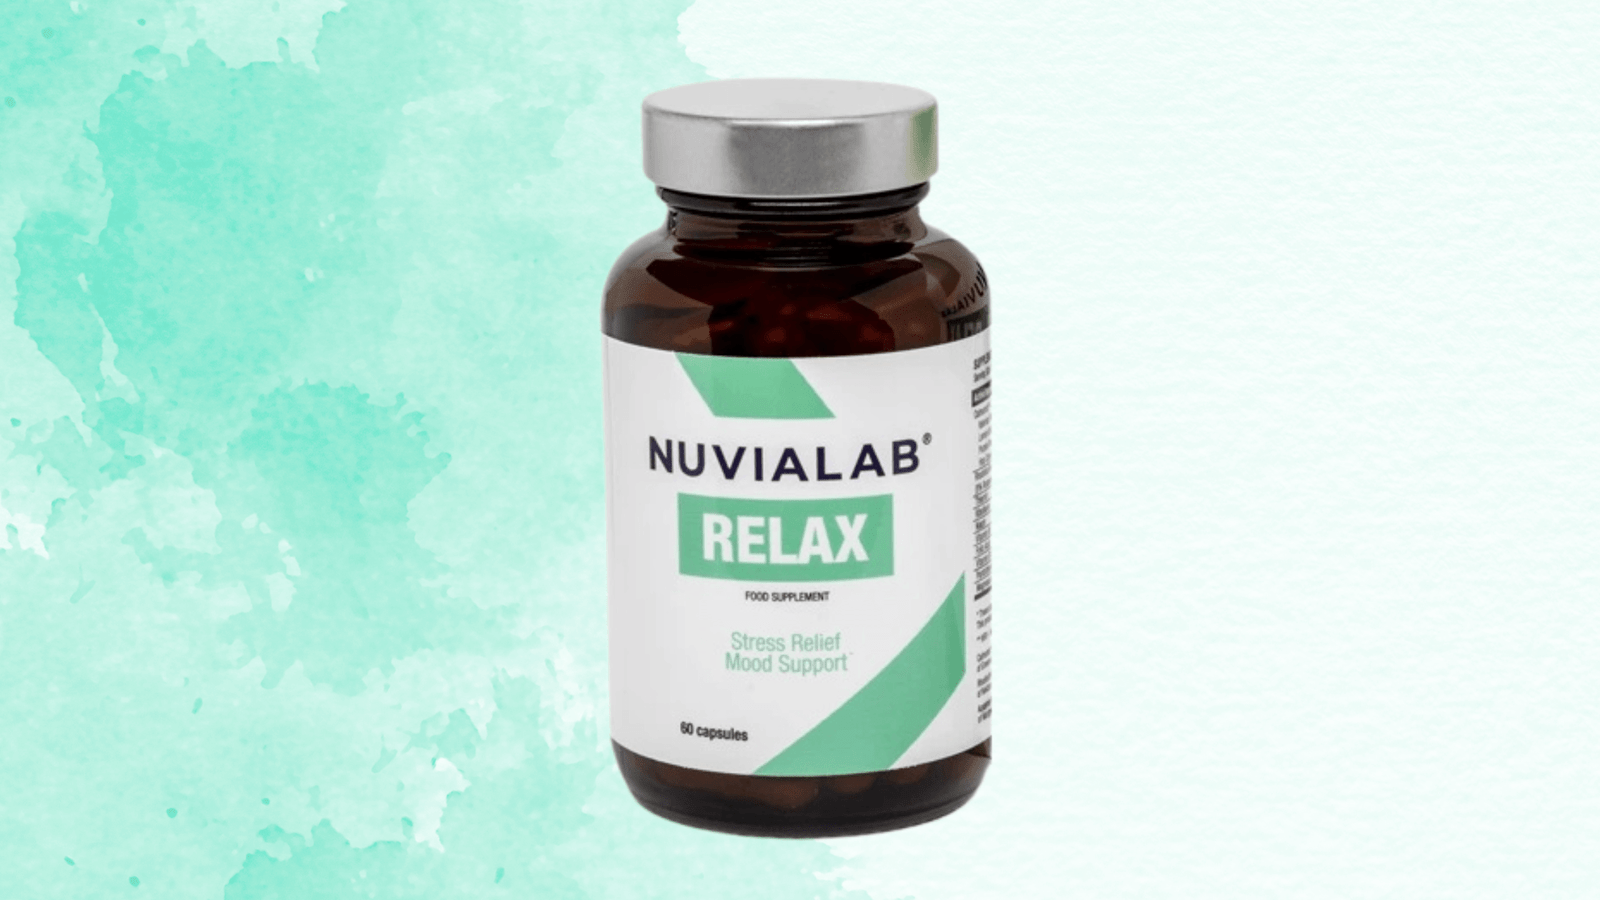 NuviaLab Relax Reviews